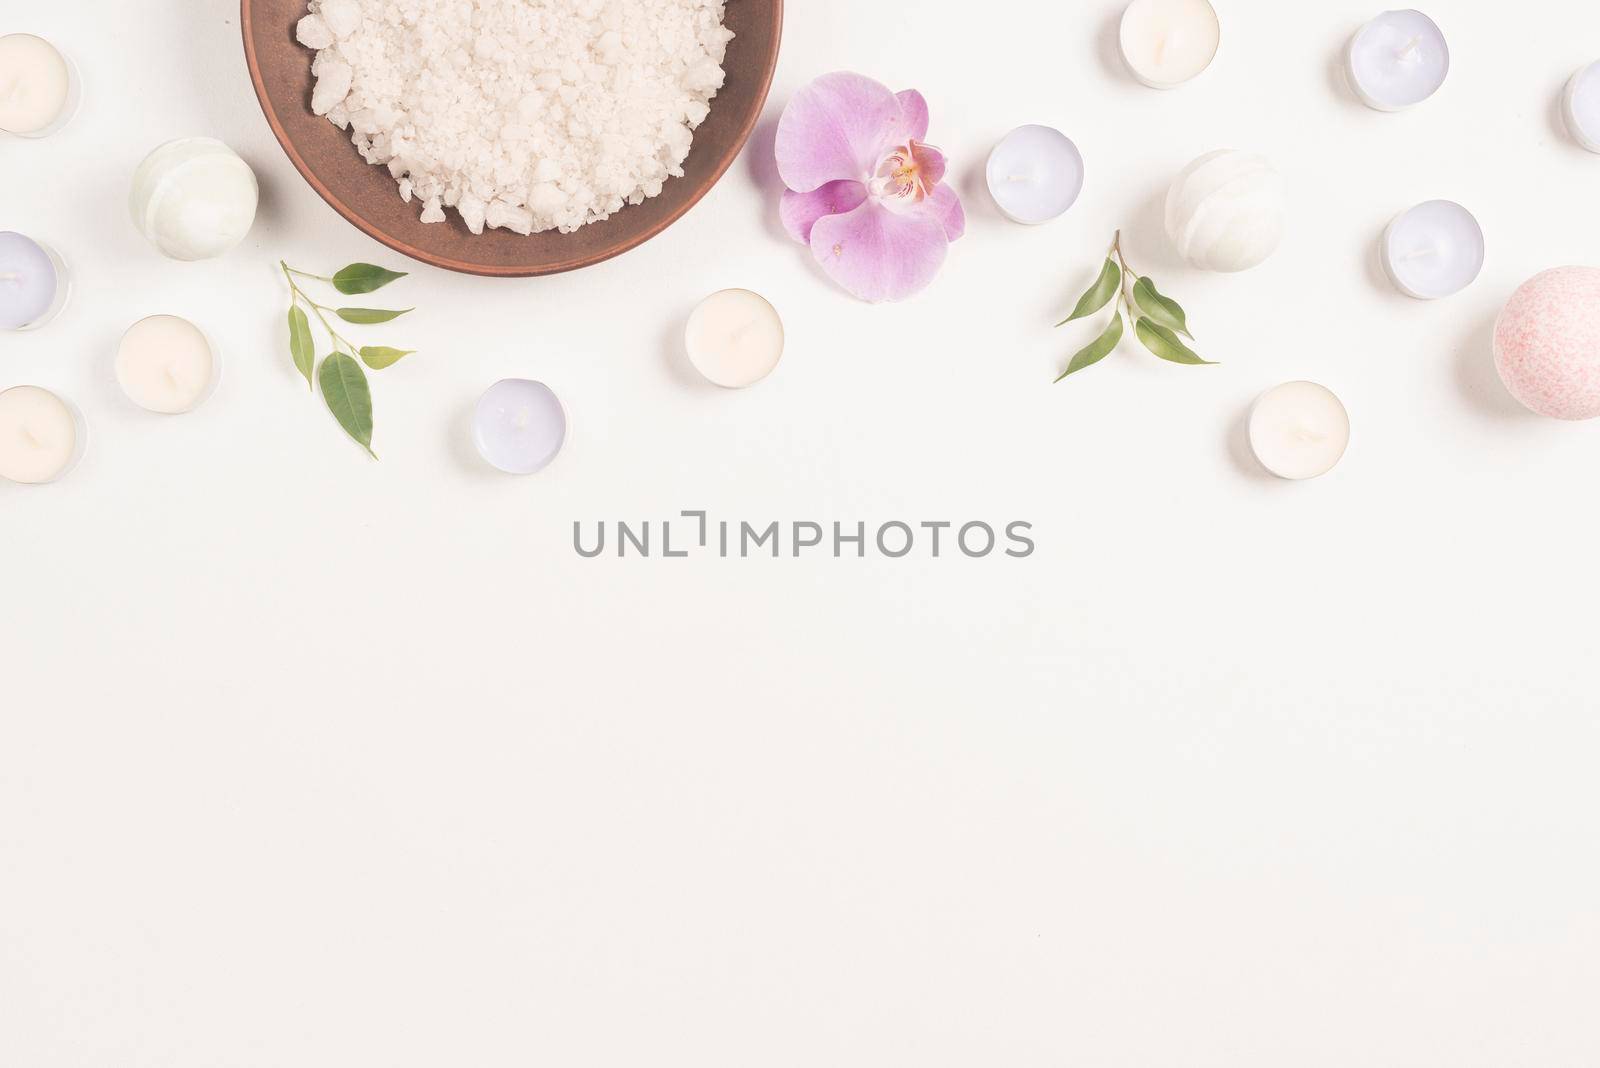 sea salt orchid flower with candles white background forming top border by Zahard